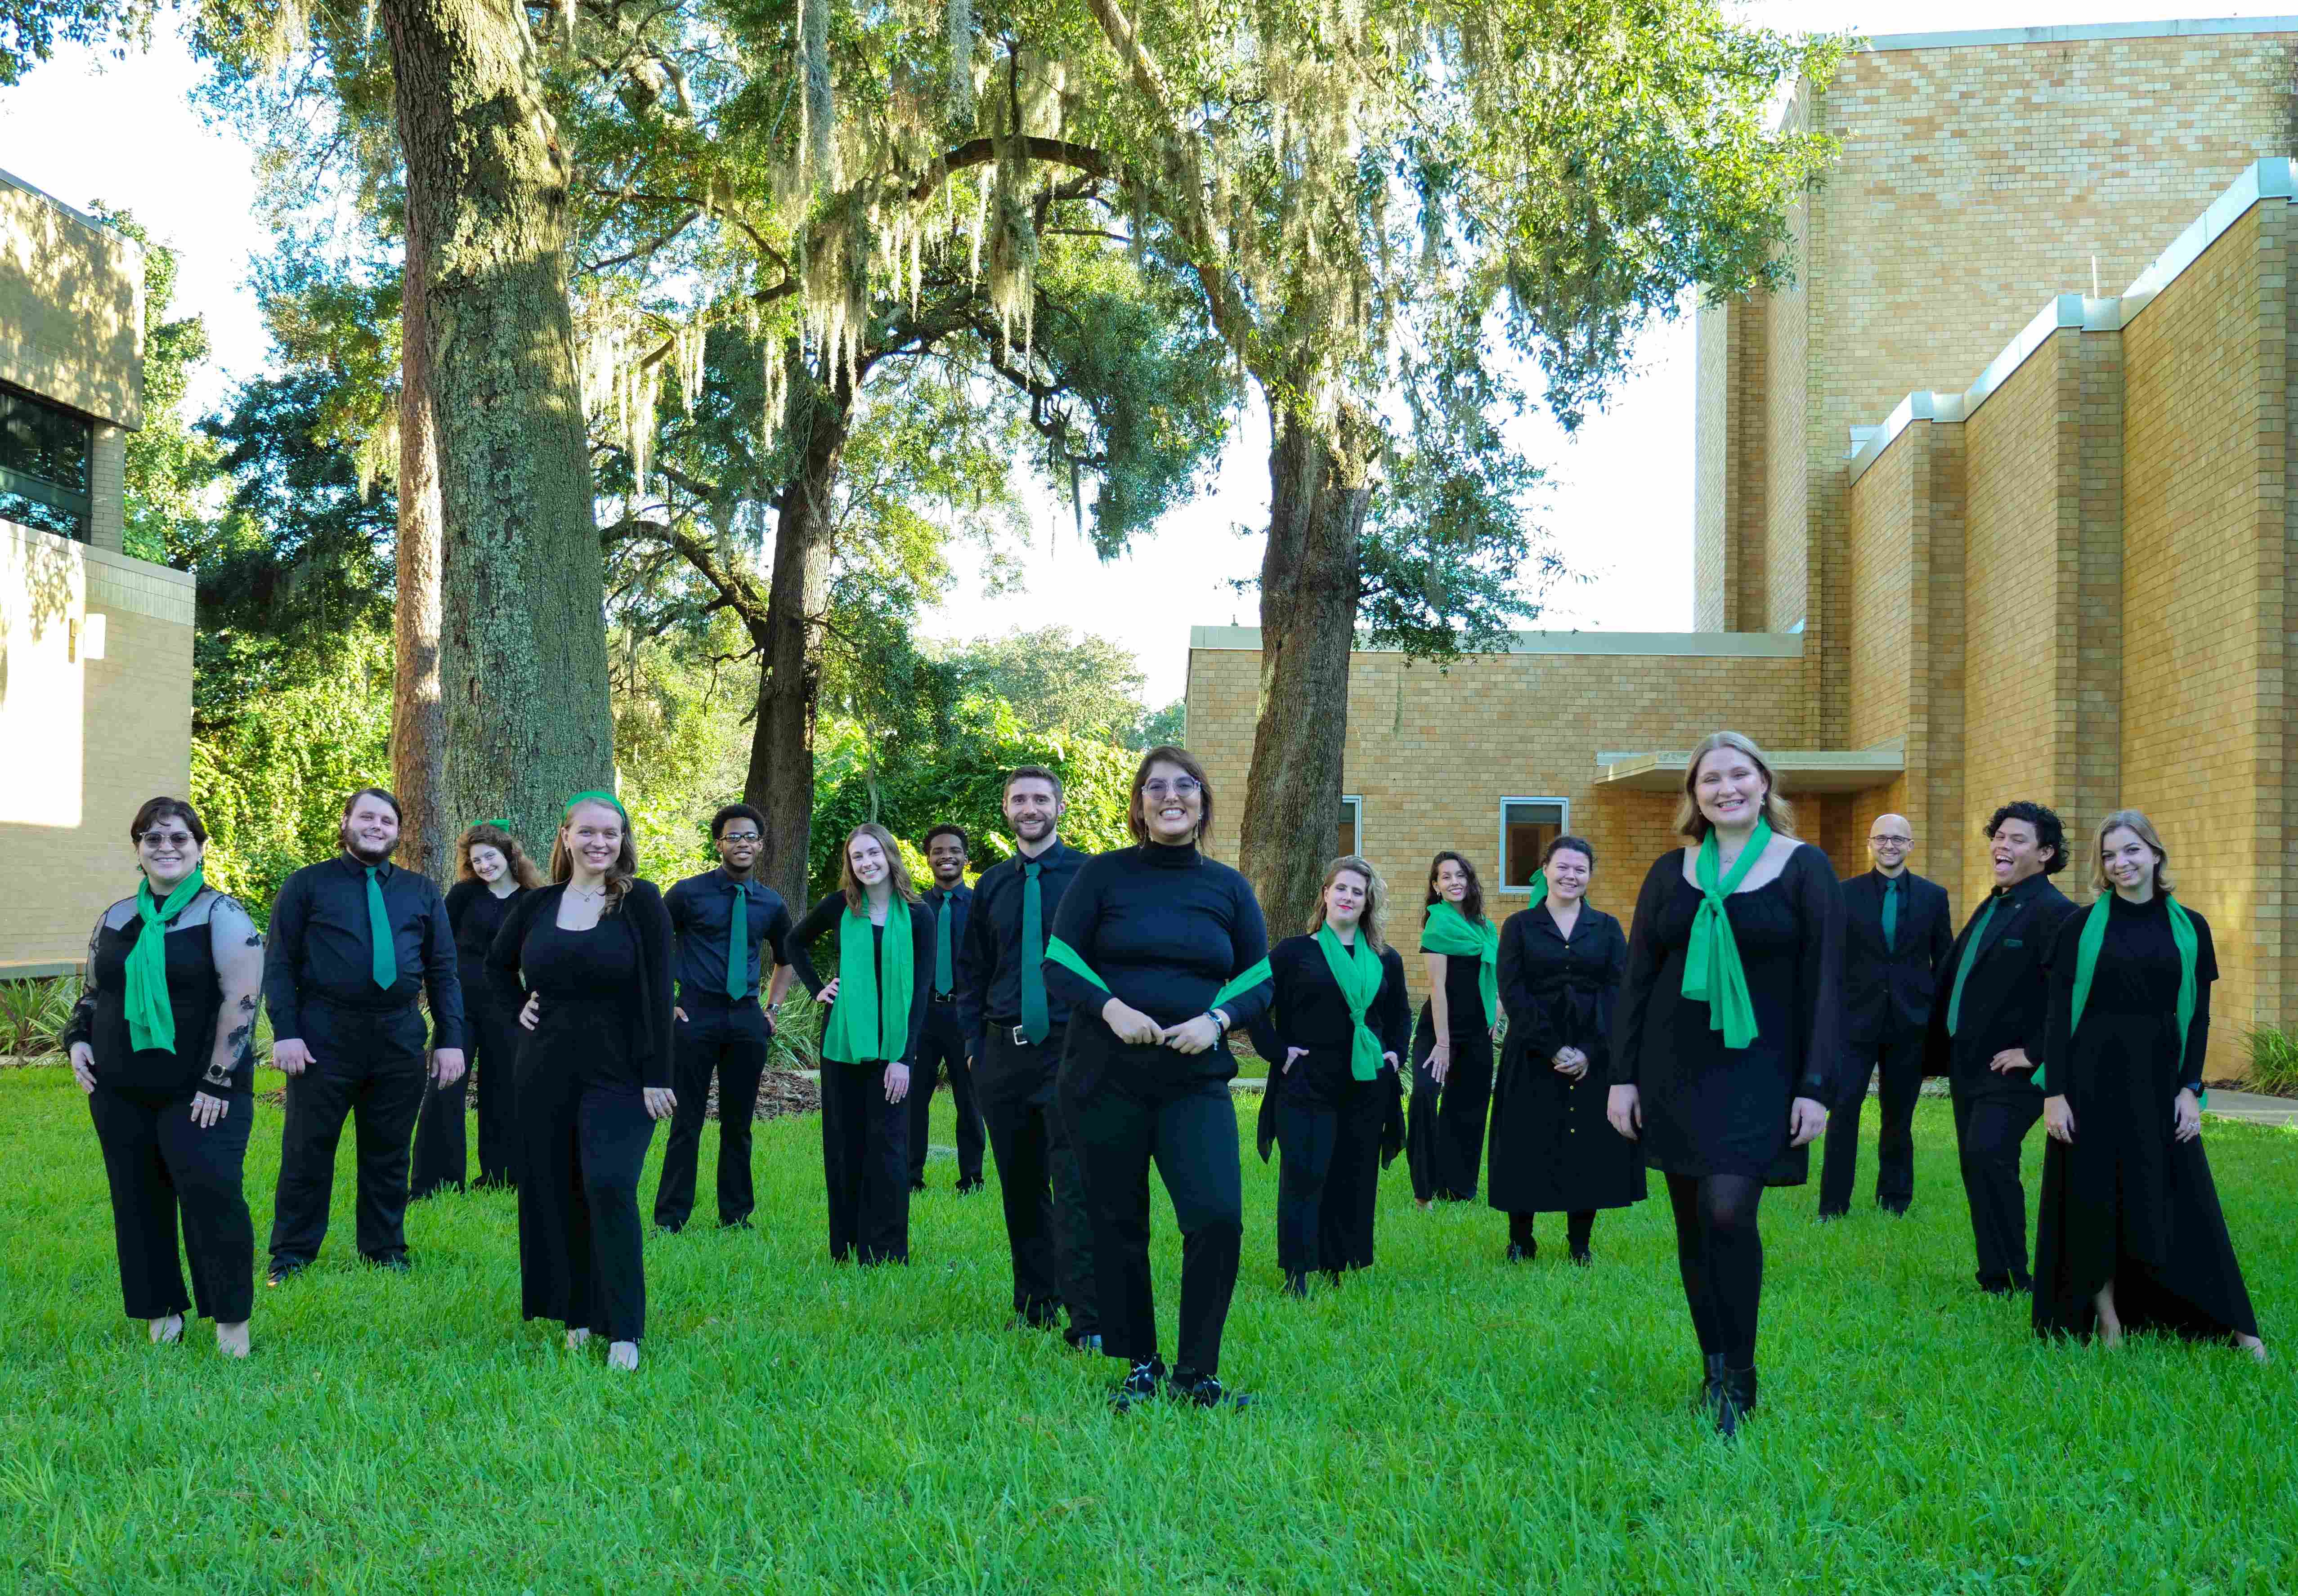 A large group of students wearing green scarves and ties over their "Concert black" attire are standing and smiling outside underneath the large oak trees characteristic of Jacksonville University's campus.   